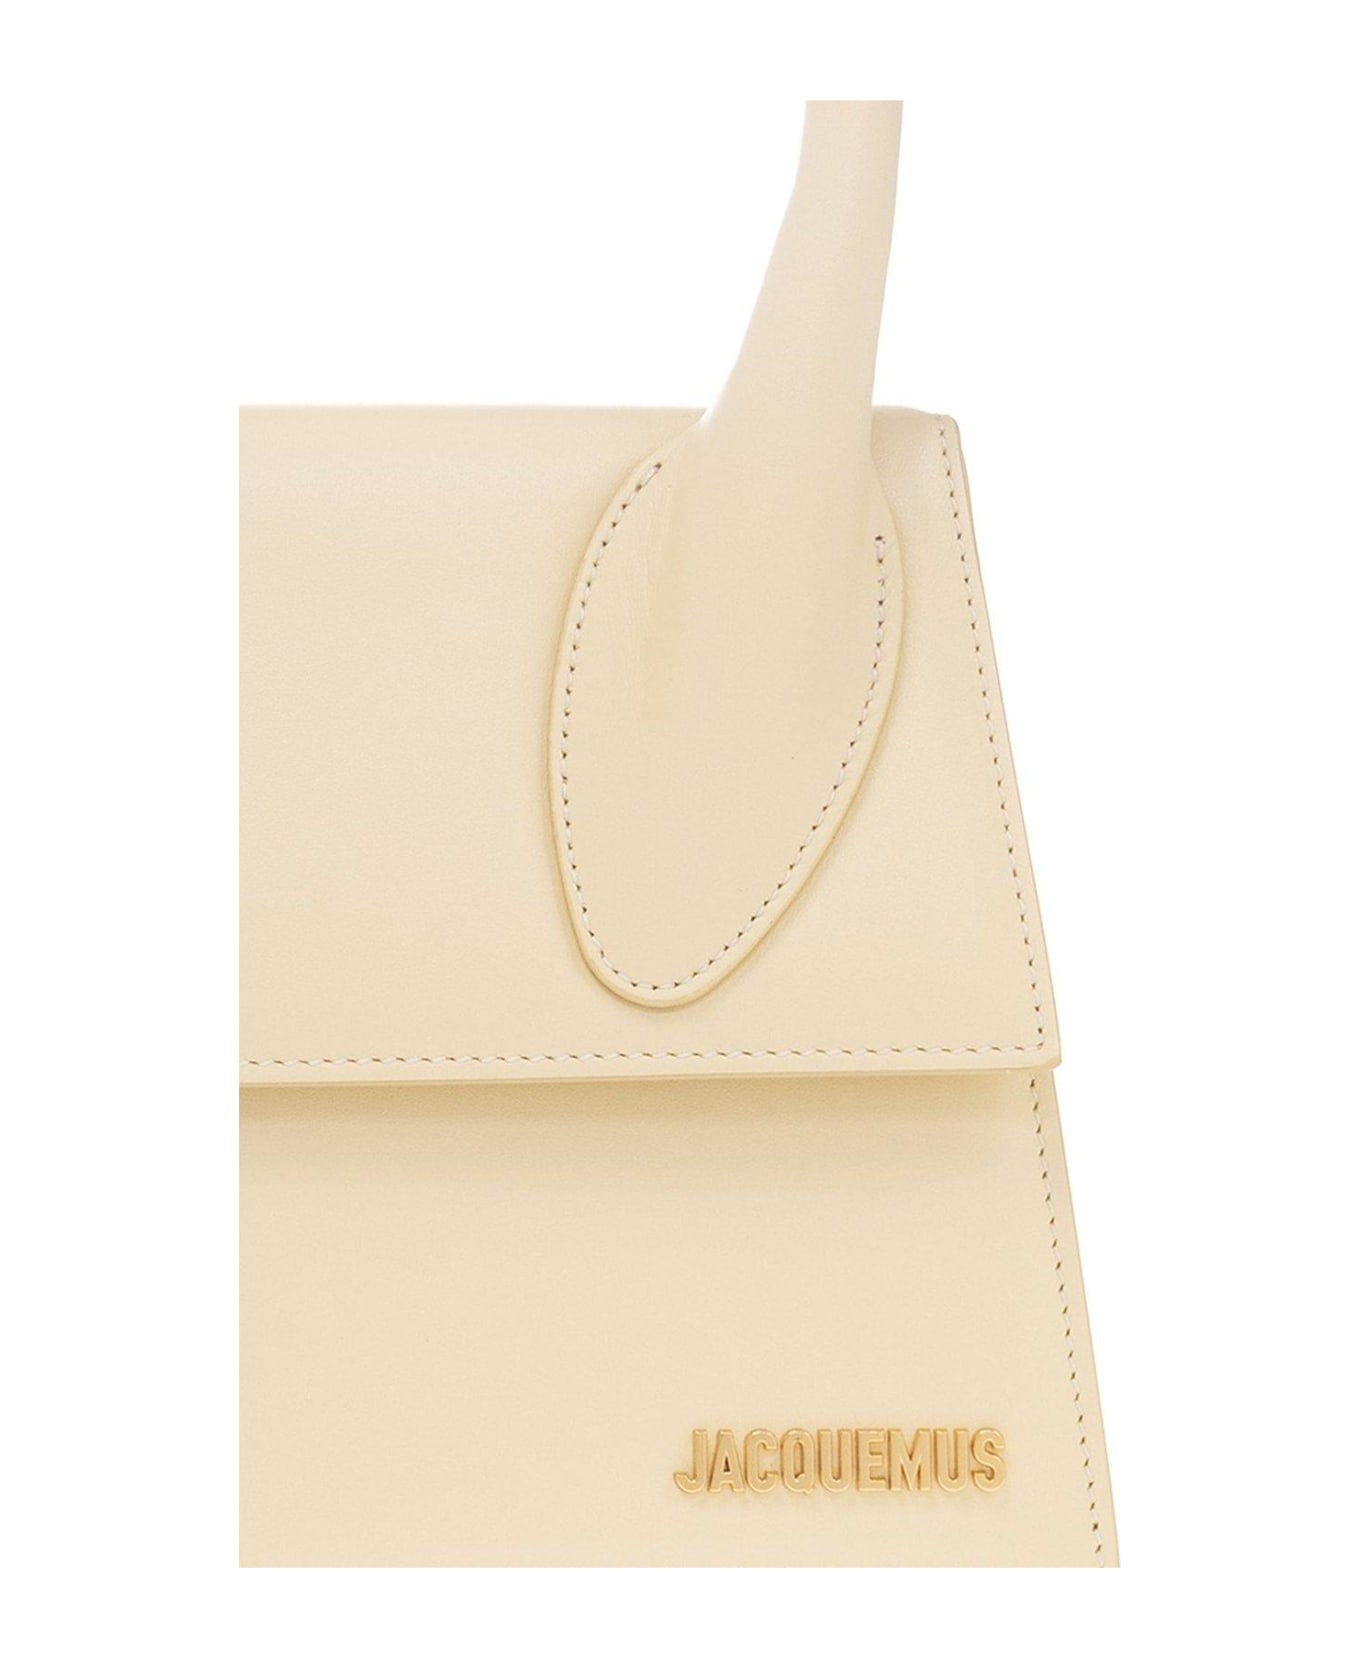 Jacquemus Le Grand Chiquito Tote Bag - White トートバッグ